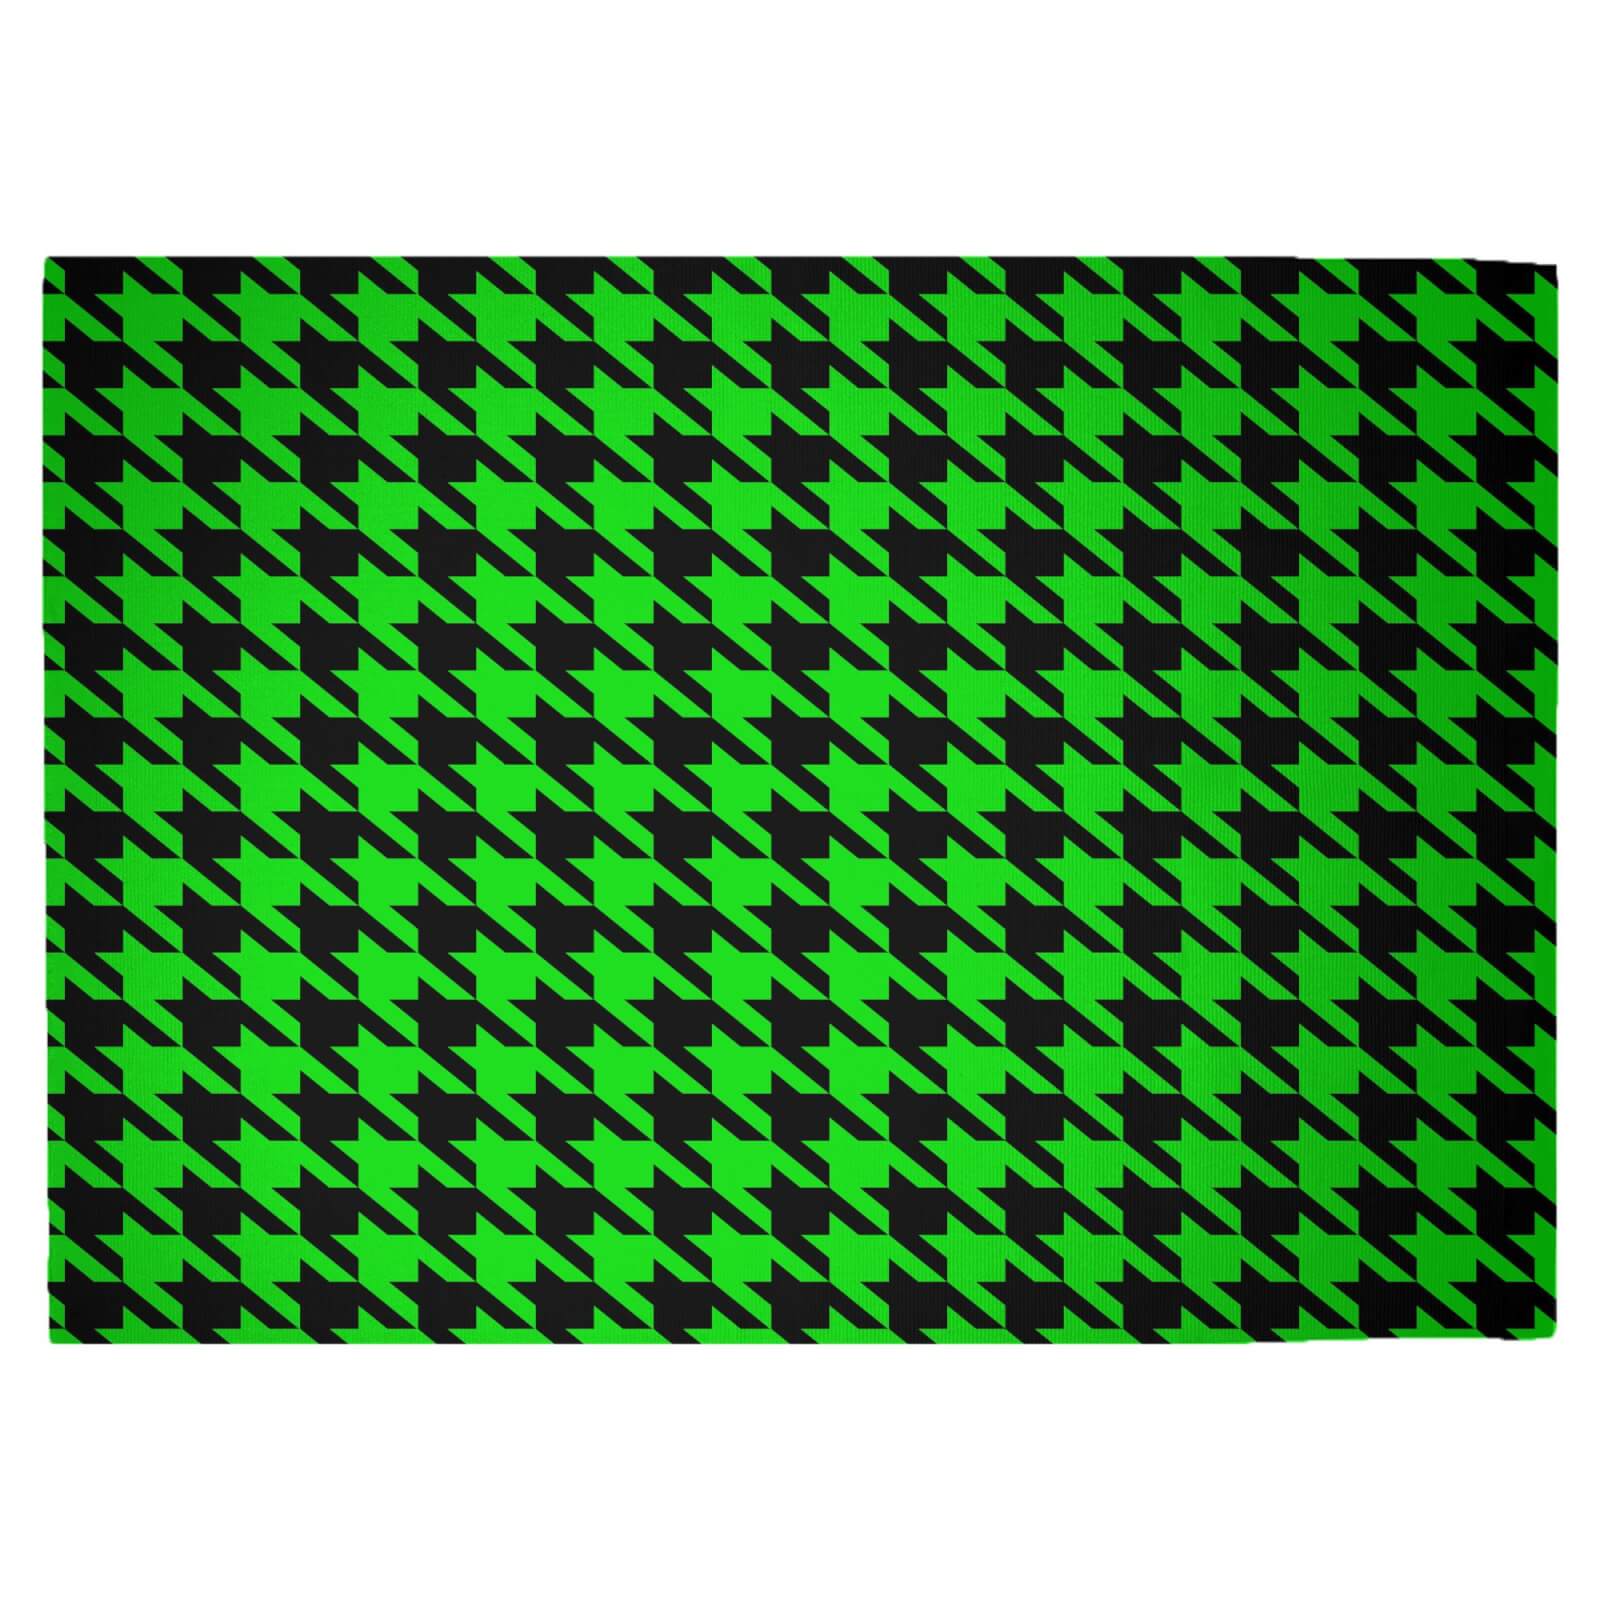 Green Dogtooth Woven Rug - Large